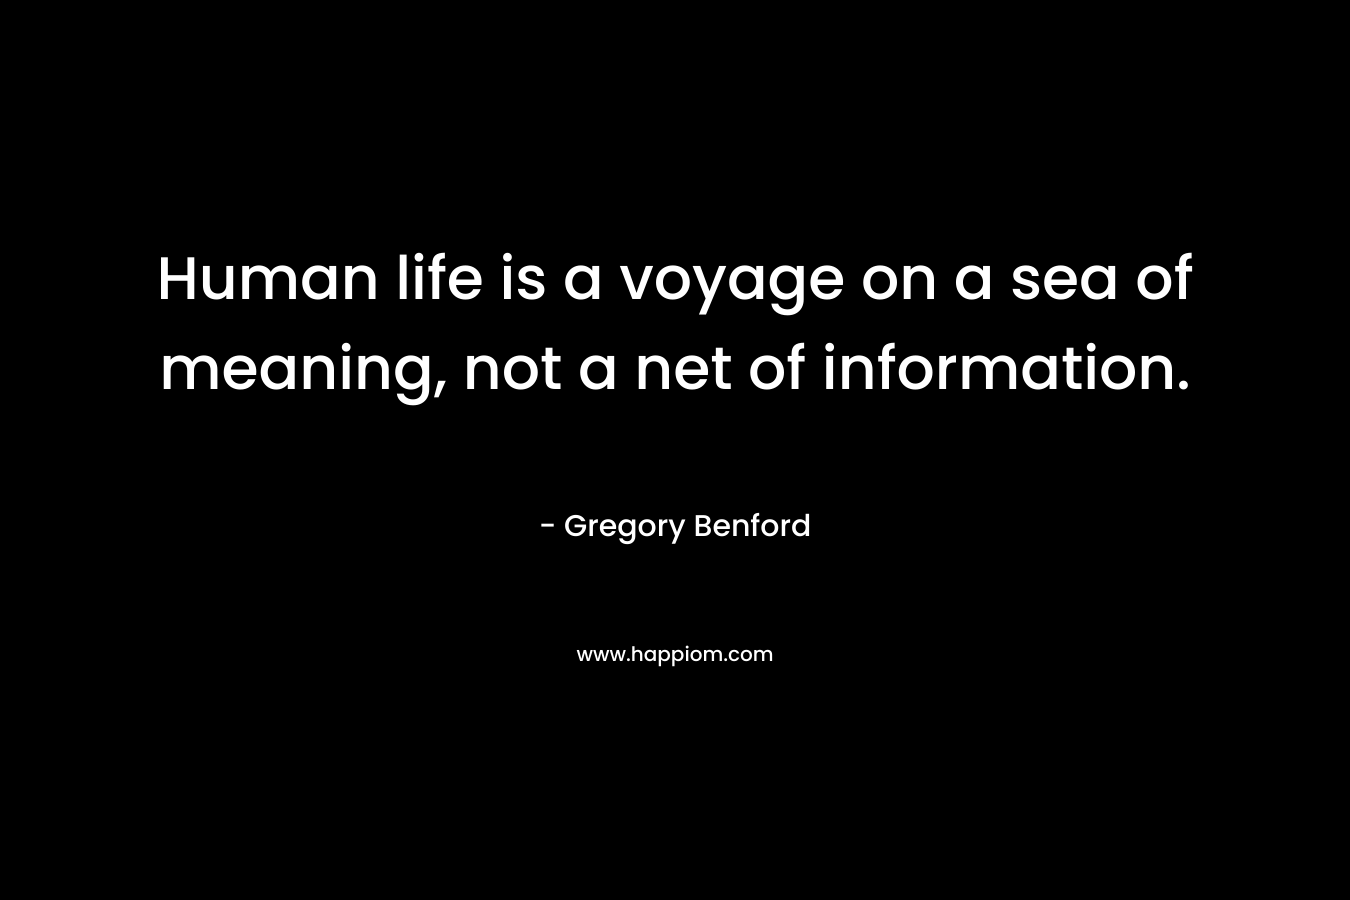 Human life is a voyage on a sea of meaning, not a net of information. – Gregory Benford